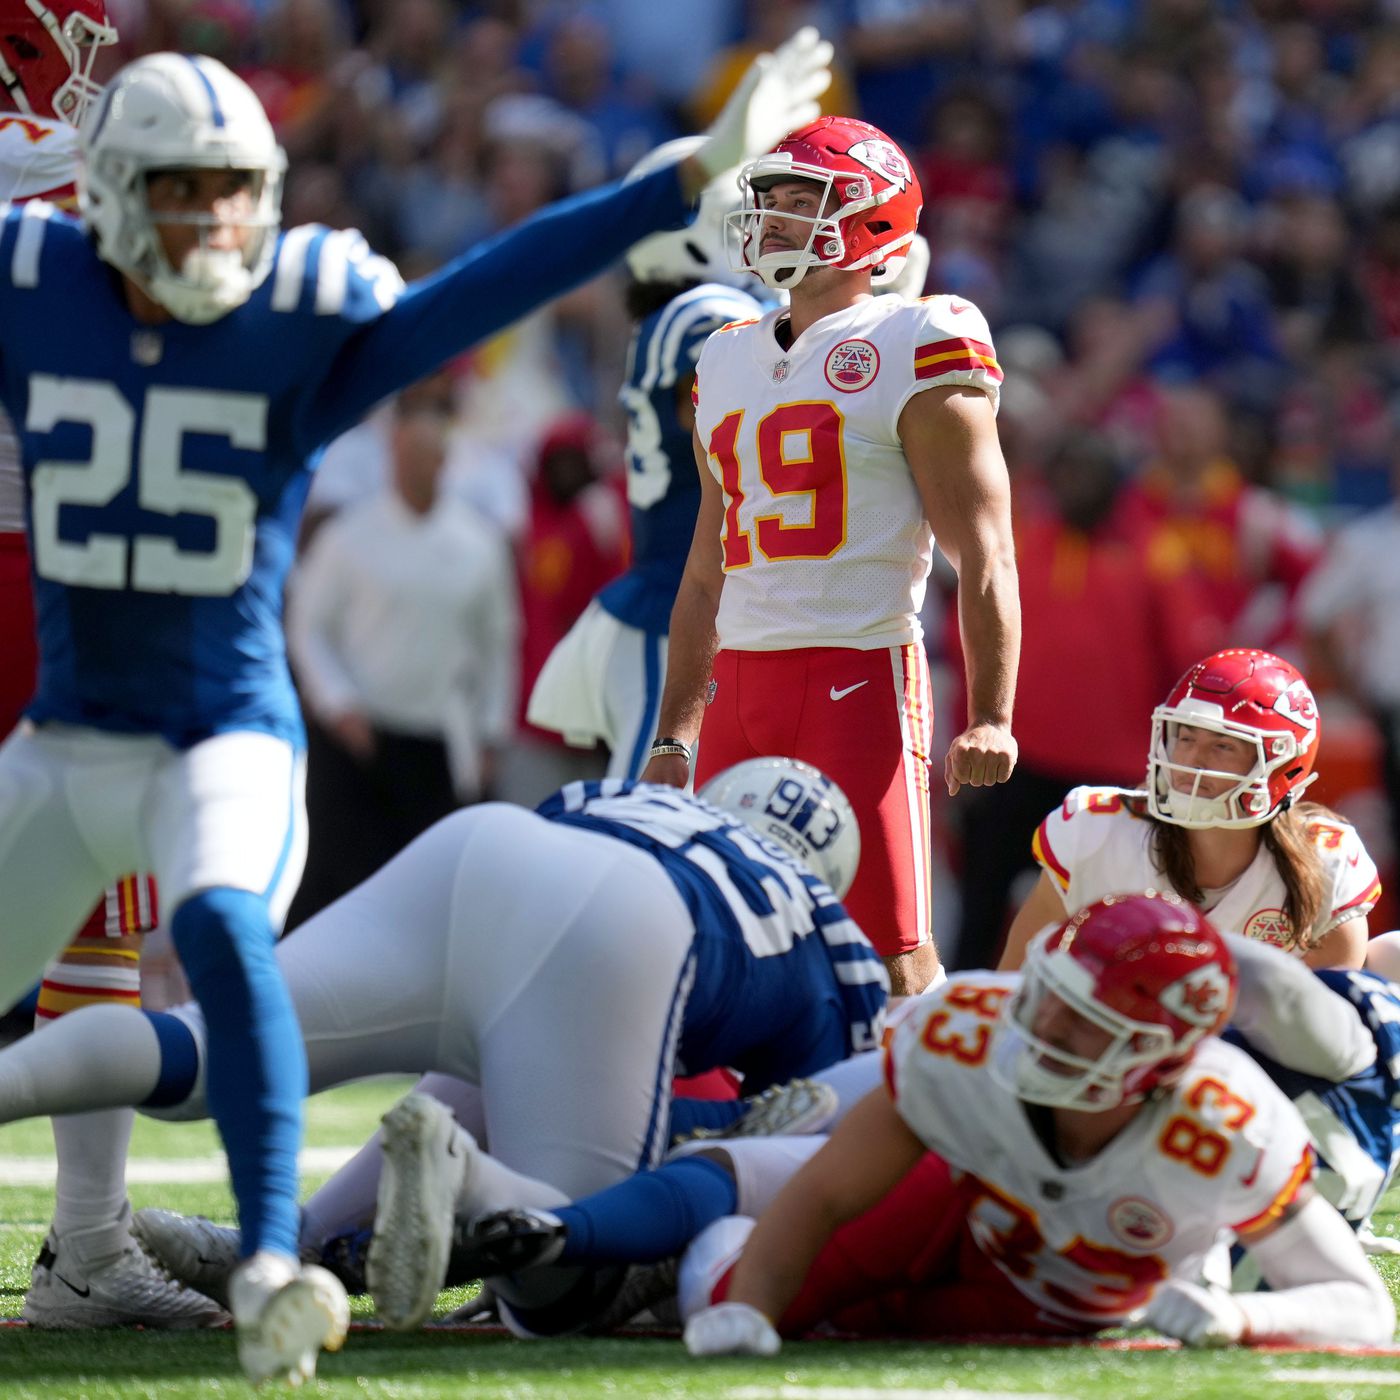 Chiefs-Colts: 5 questions with the enemy - Arrowhead Pride